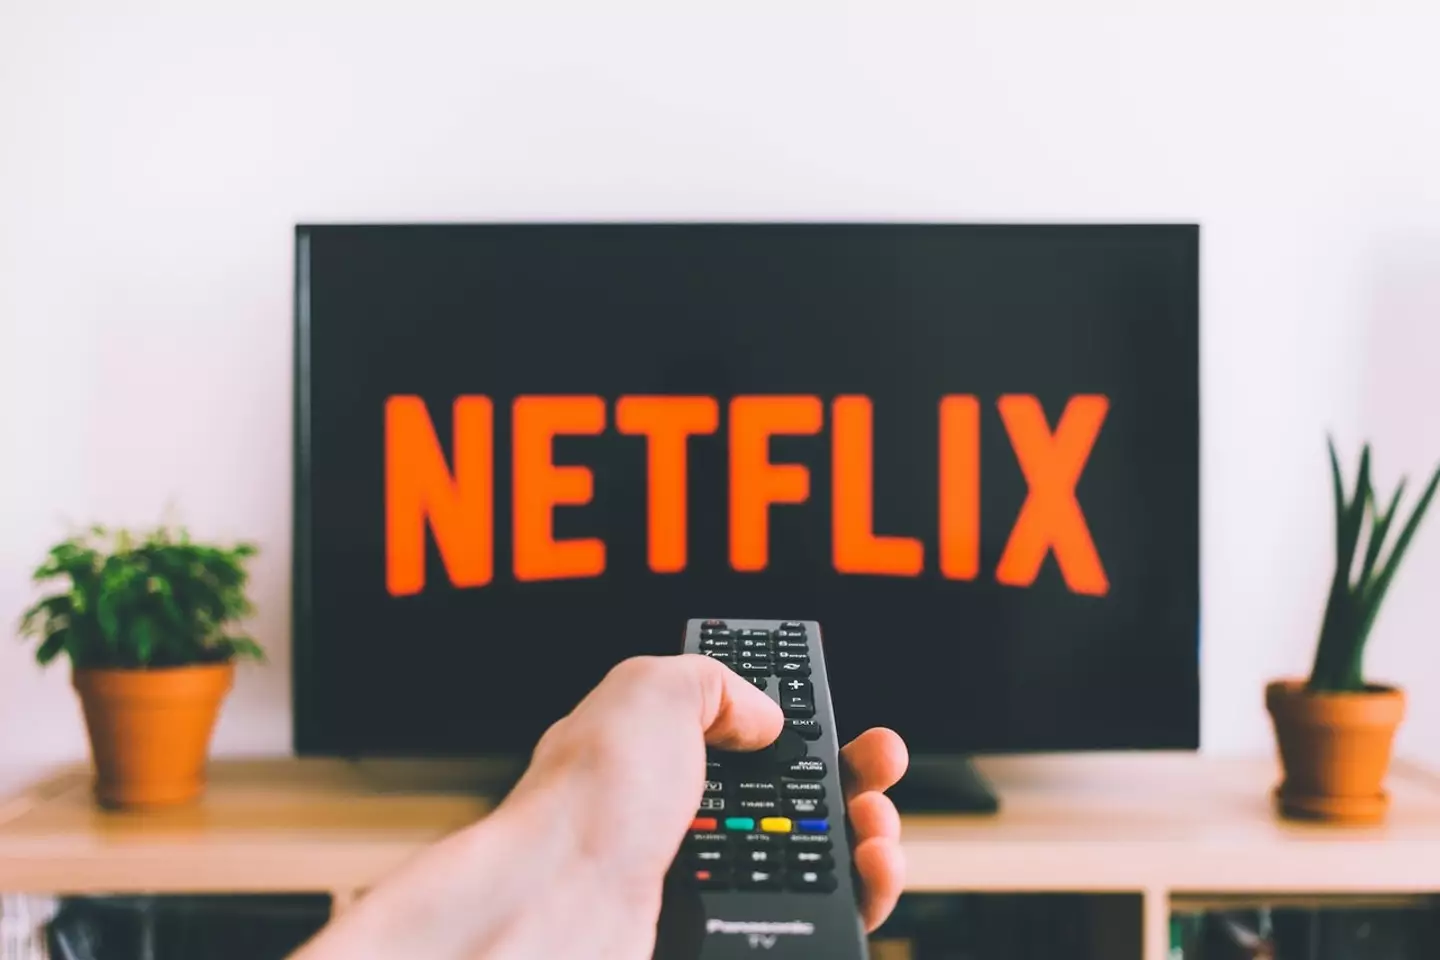 Netflix has announced it will start to charge people who share accounts from next month onwards.